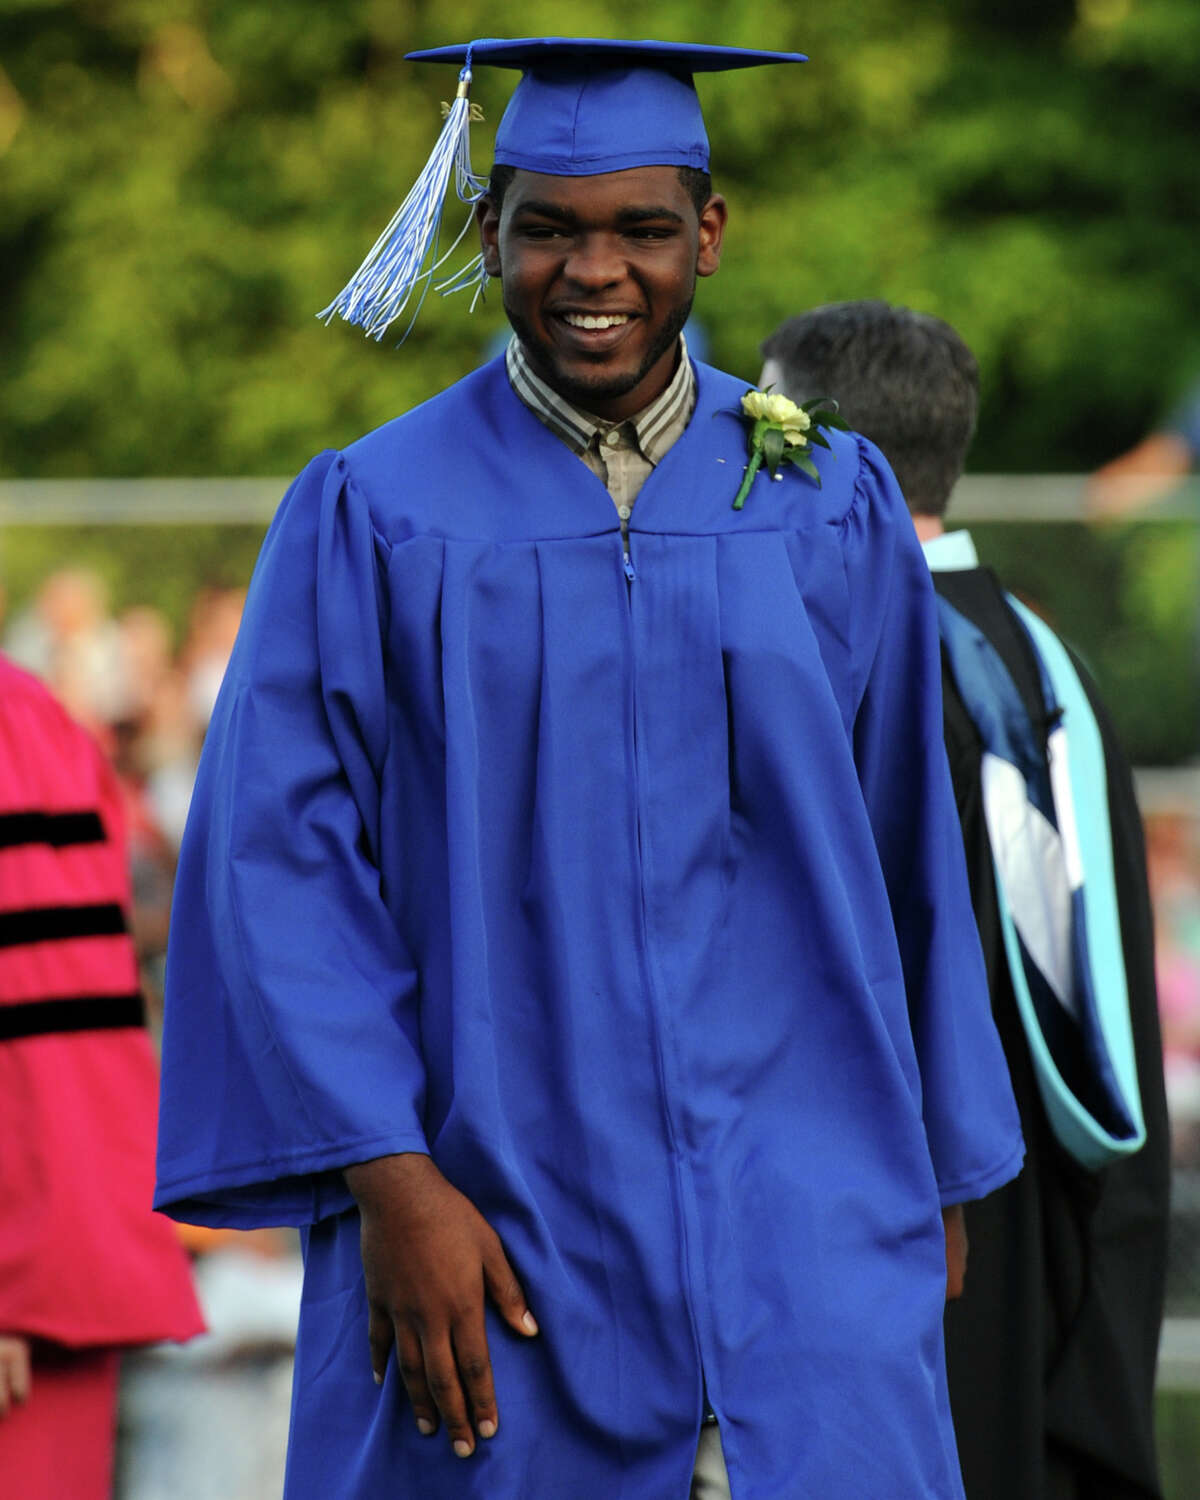 Commencement for the Frank Scott Bunnell High School Class of 2014, in Stratford, Conn. June 18, 2014.